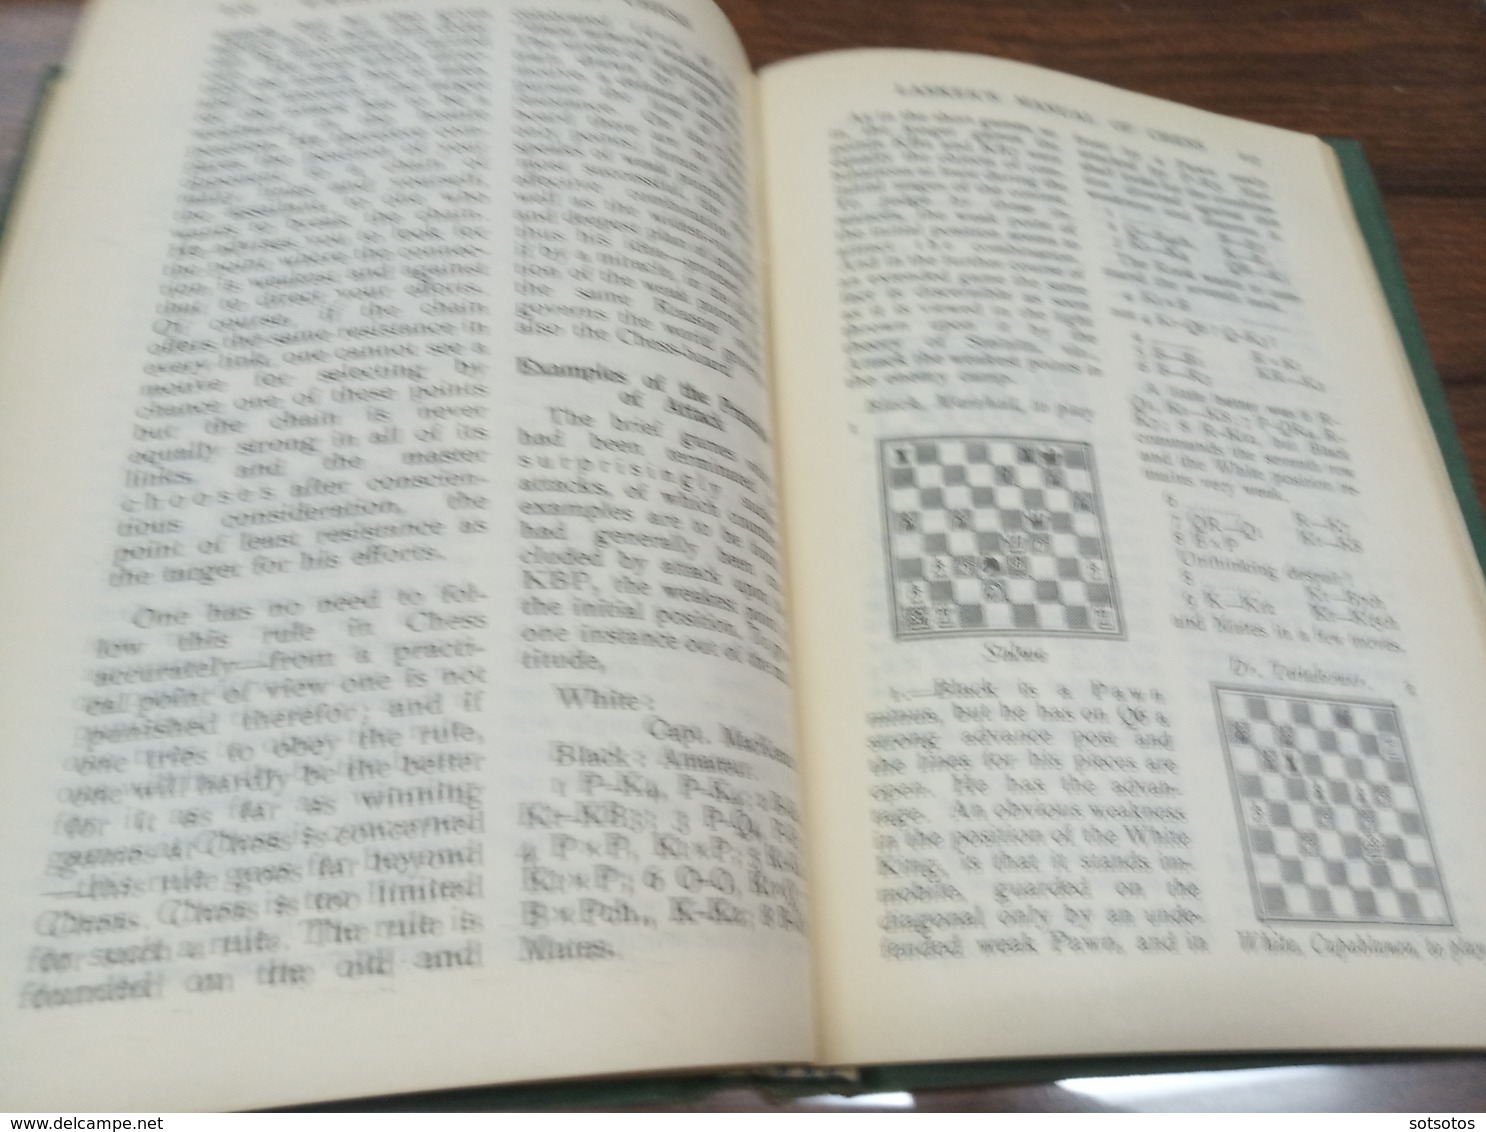 Lasker's Manual of Chess, Emanuel Lasker, Dover Publications N.Y.. 1960 - 374 pages (19x13,5 cm) - in good condition